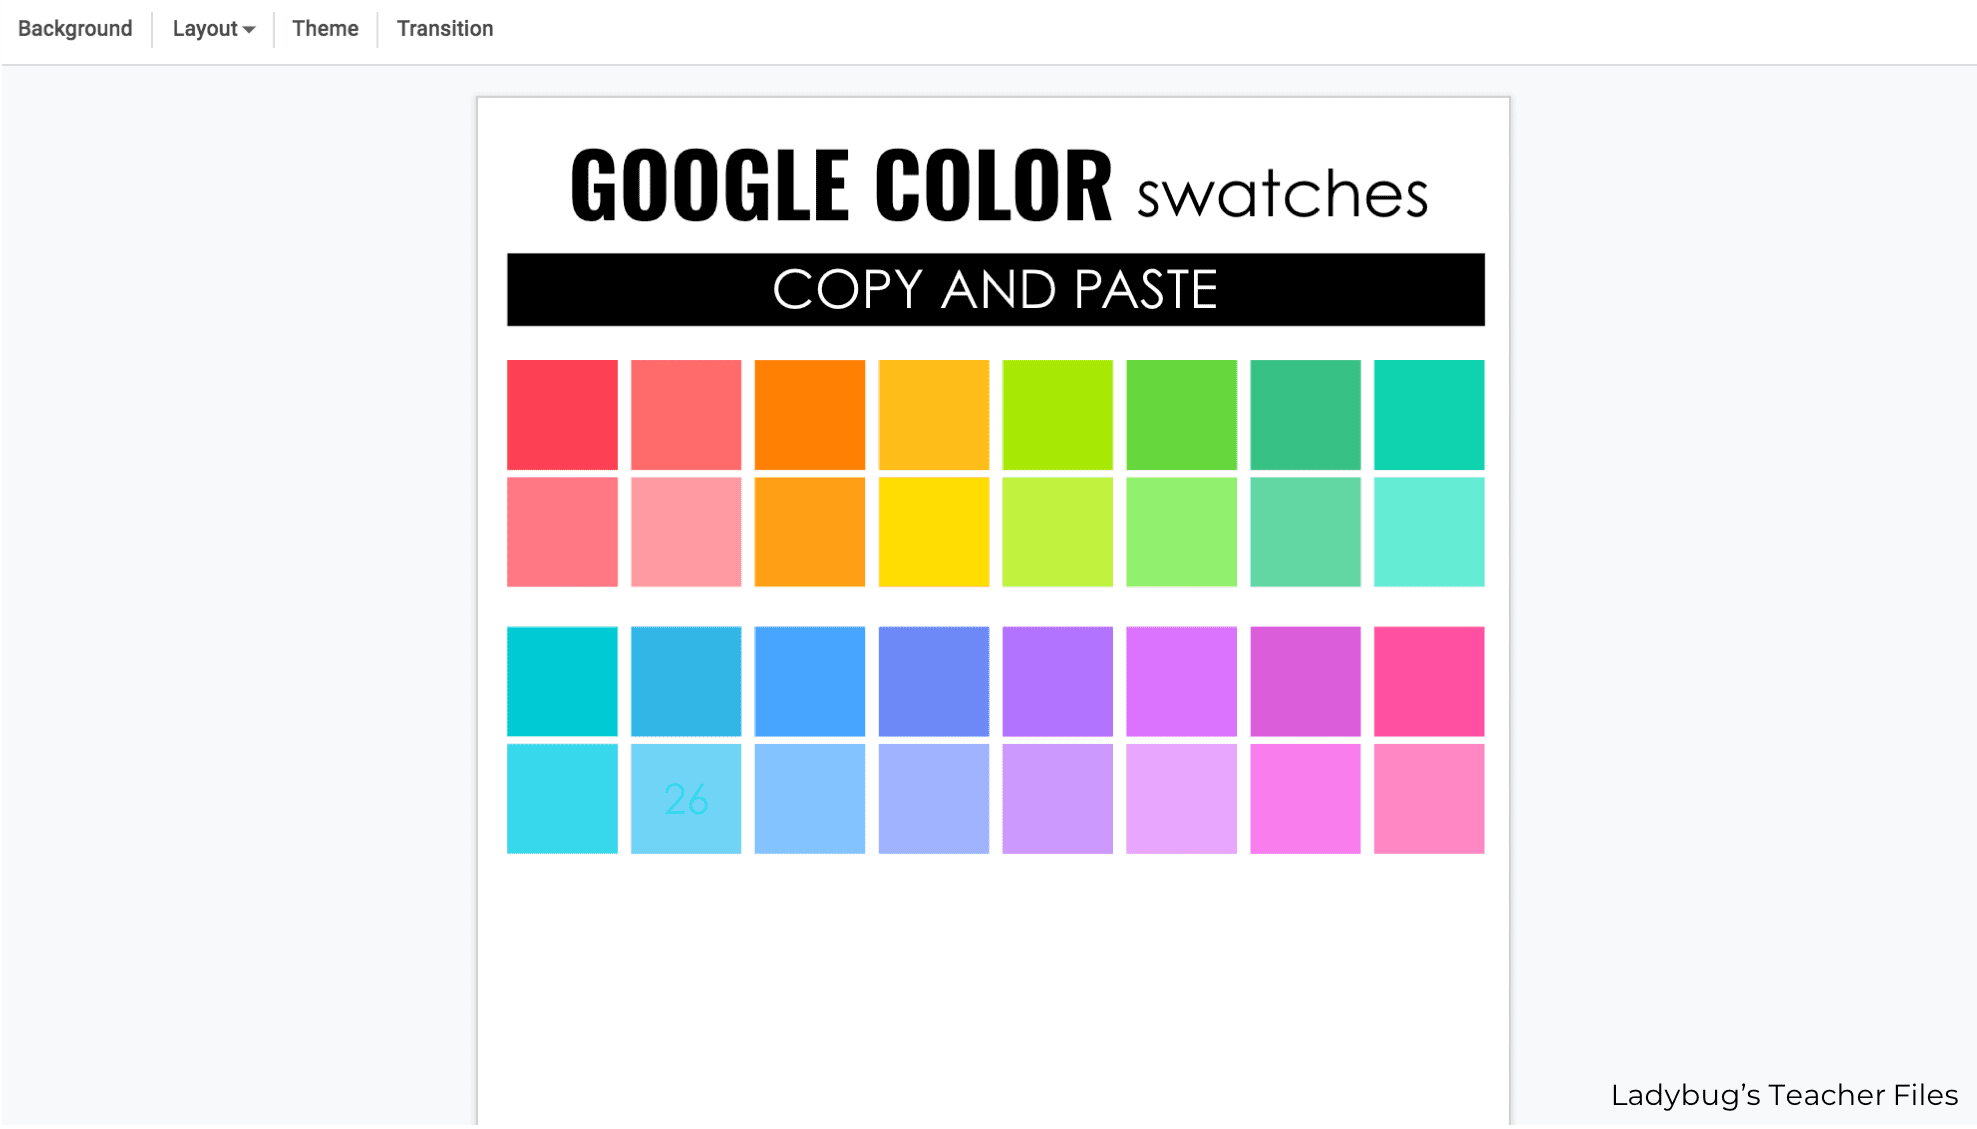 open the color swatches template